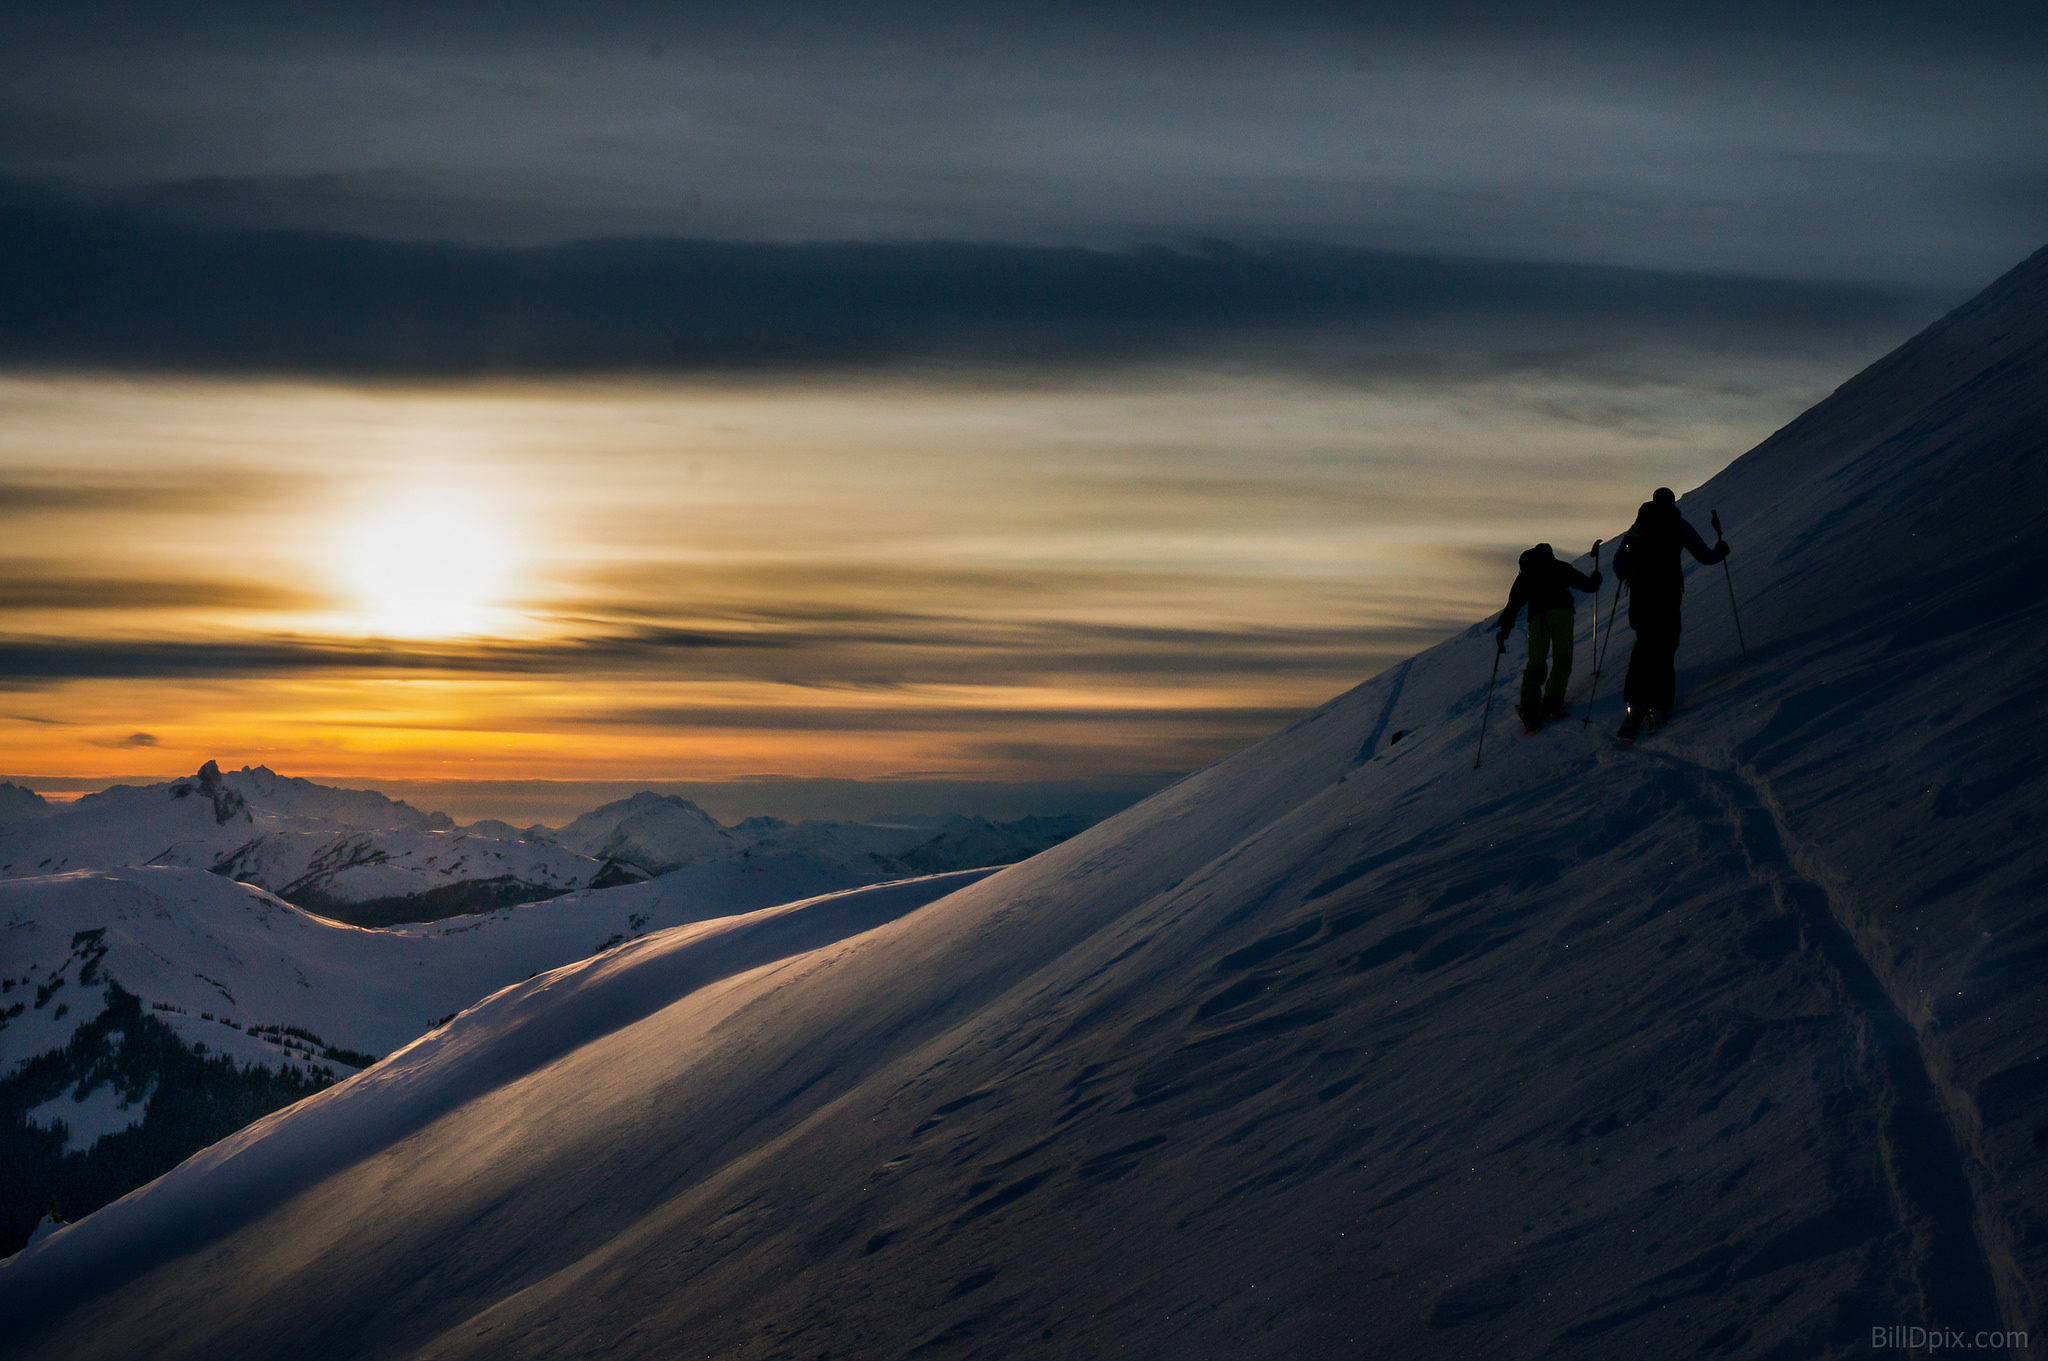 Whistler Blackcomb Mountain: Tips and Tricks for Photographer’s Paradise